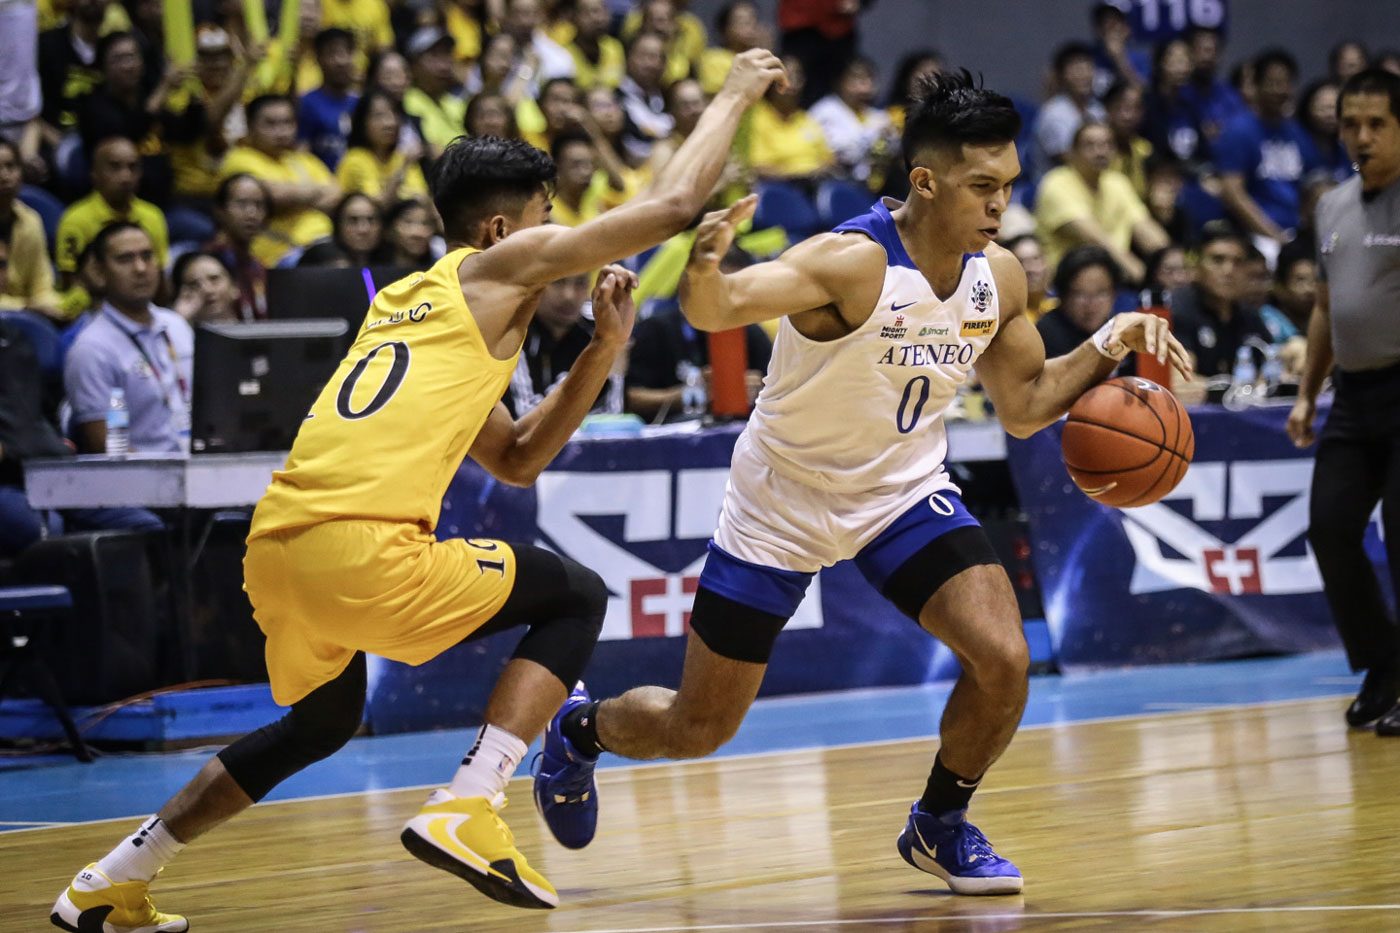 IN PHOTOS: Ateneo reduces UST to tears